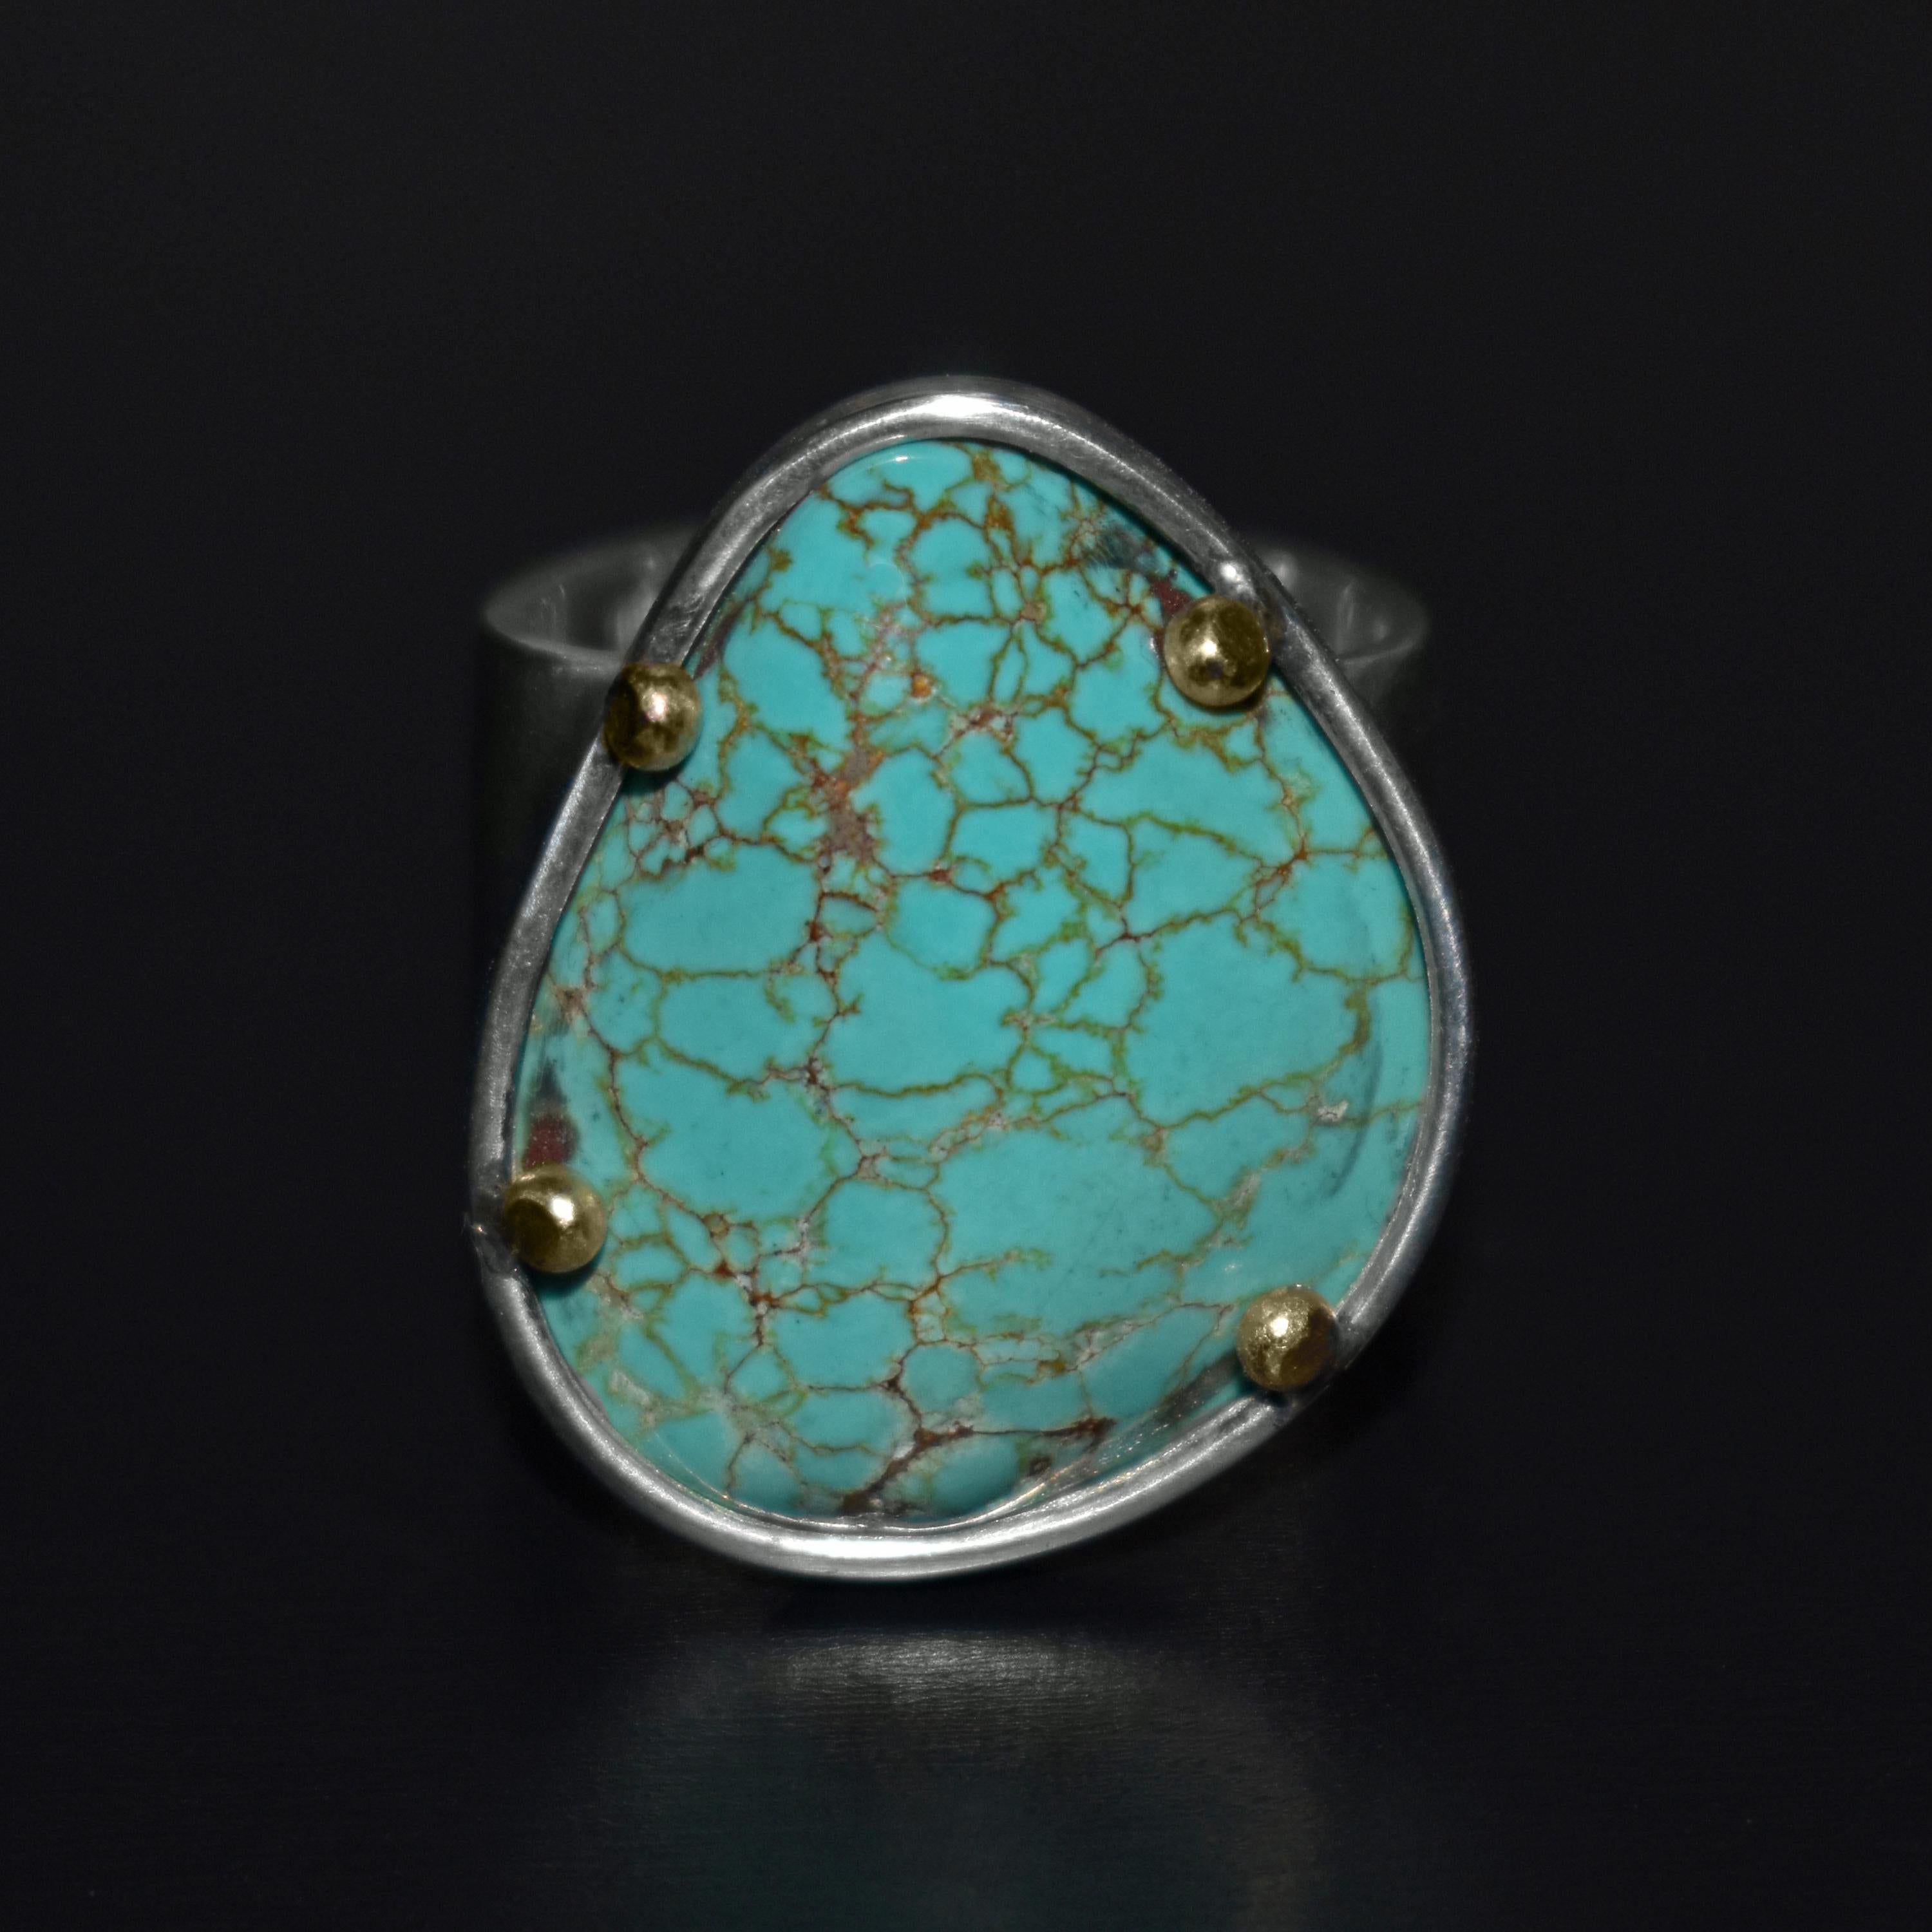 Handmade sterling silver with 14k yellow gold cocktail ring featuring a gorgeous, natural Russian Turquoise gemstone. Ring is 7.5 in size. Ring band is 0.5 inches wide. Stone measures 0.94 inch length by 0.81 inch width.